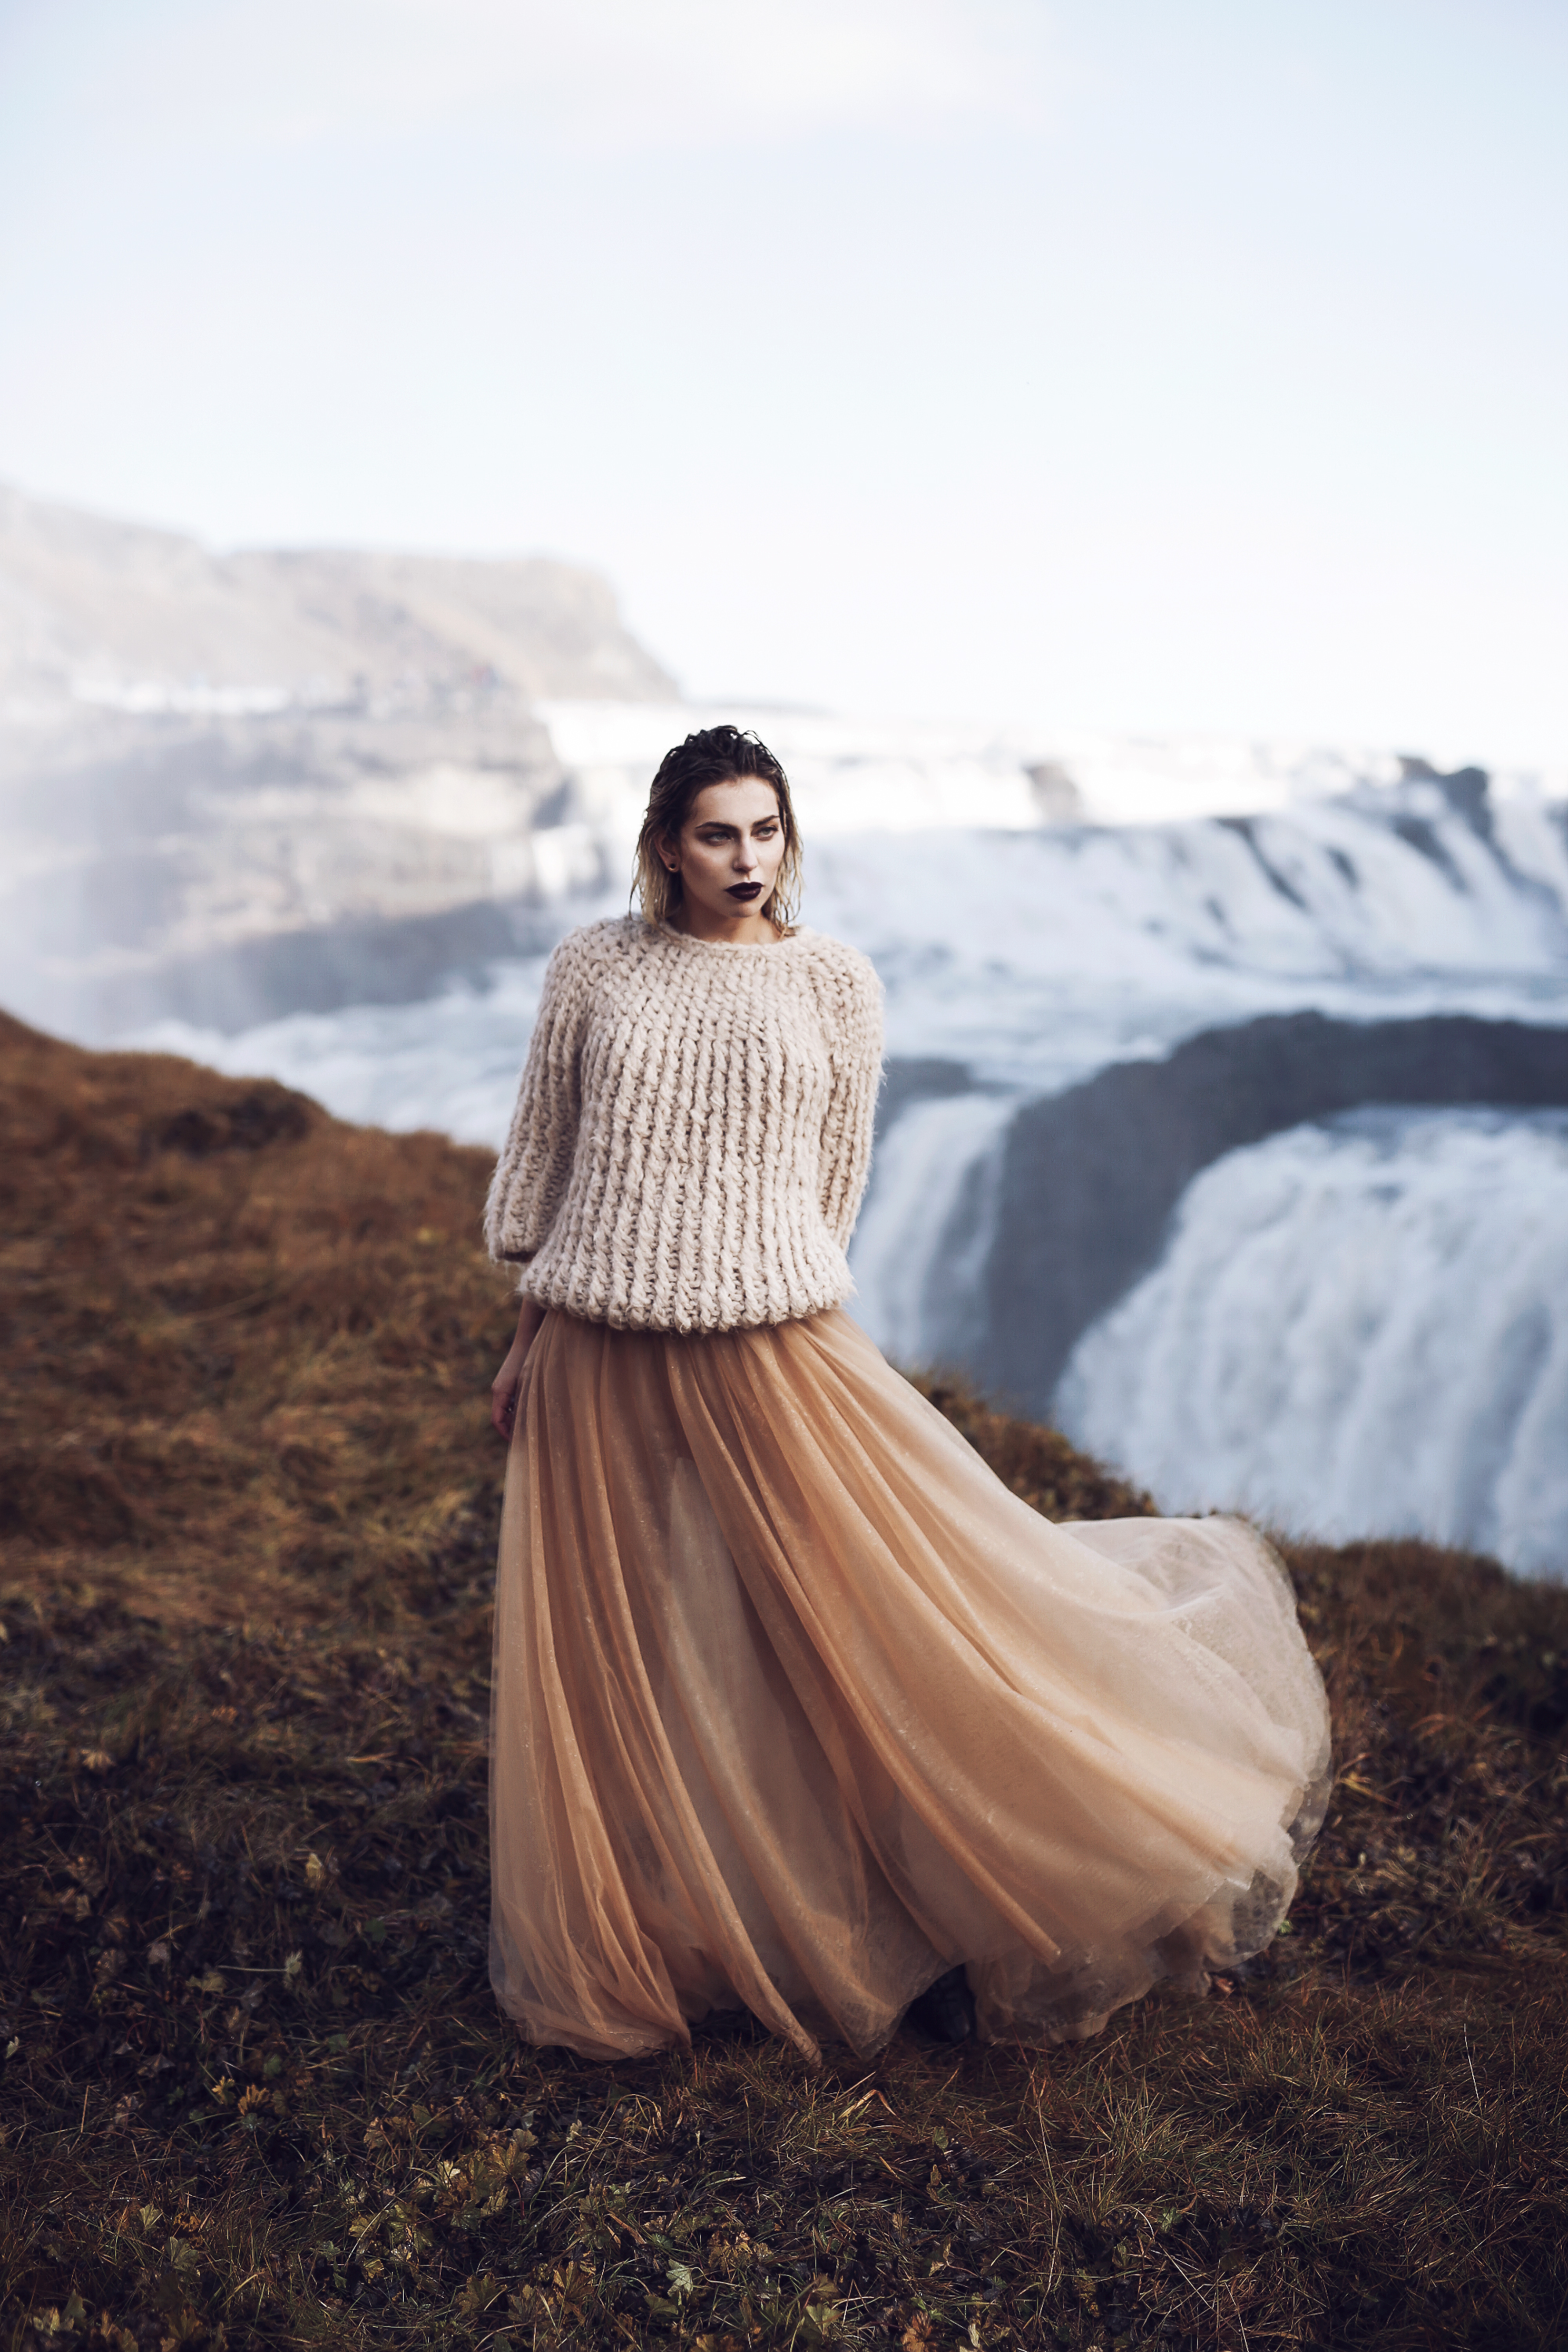 Waterfall in Iceland | Editorial Fashion Shooting for mybestbrands | style: feminine, melancholic, winter princess